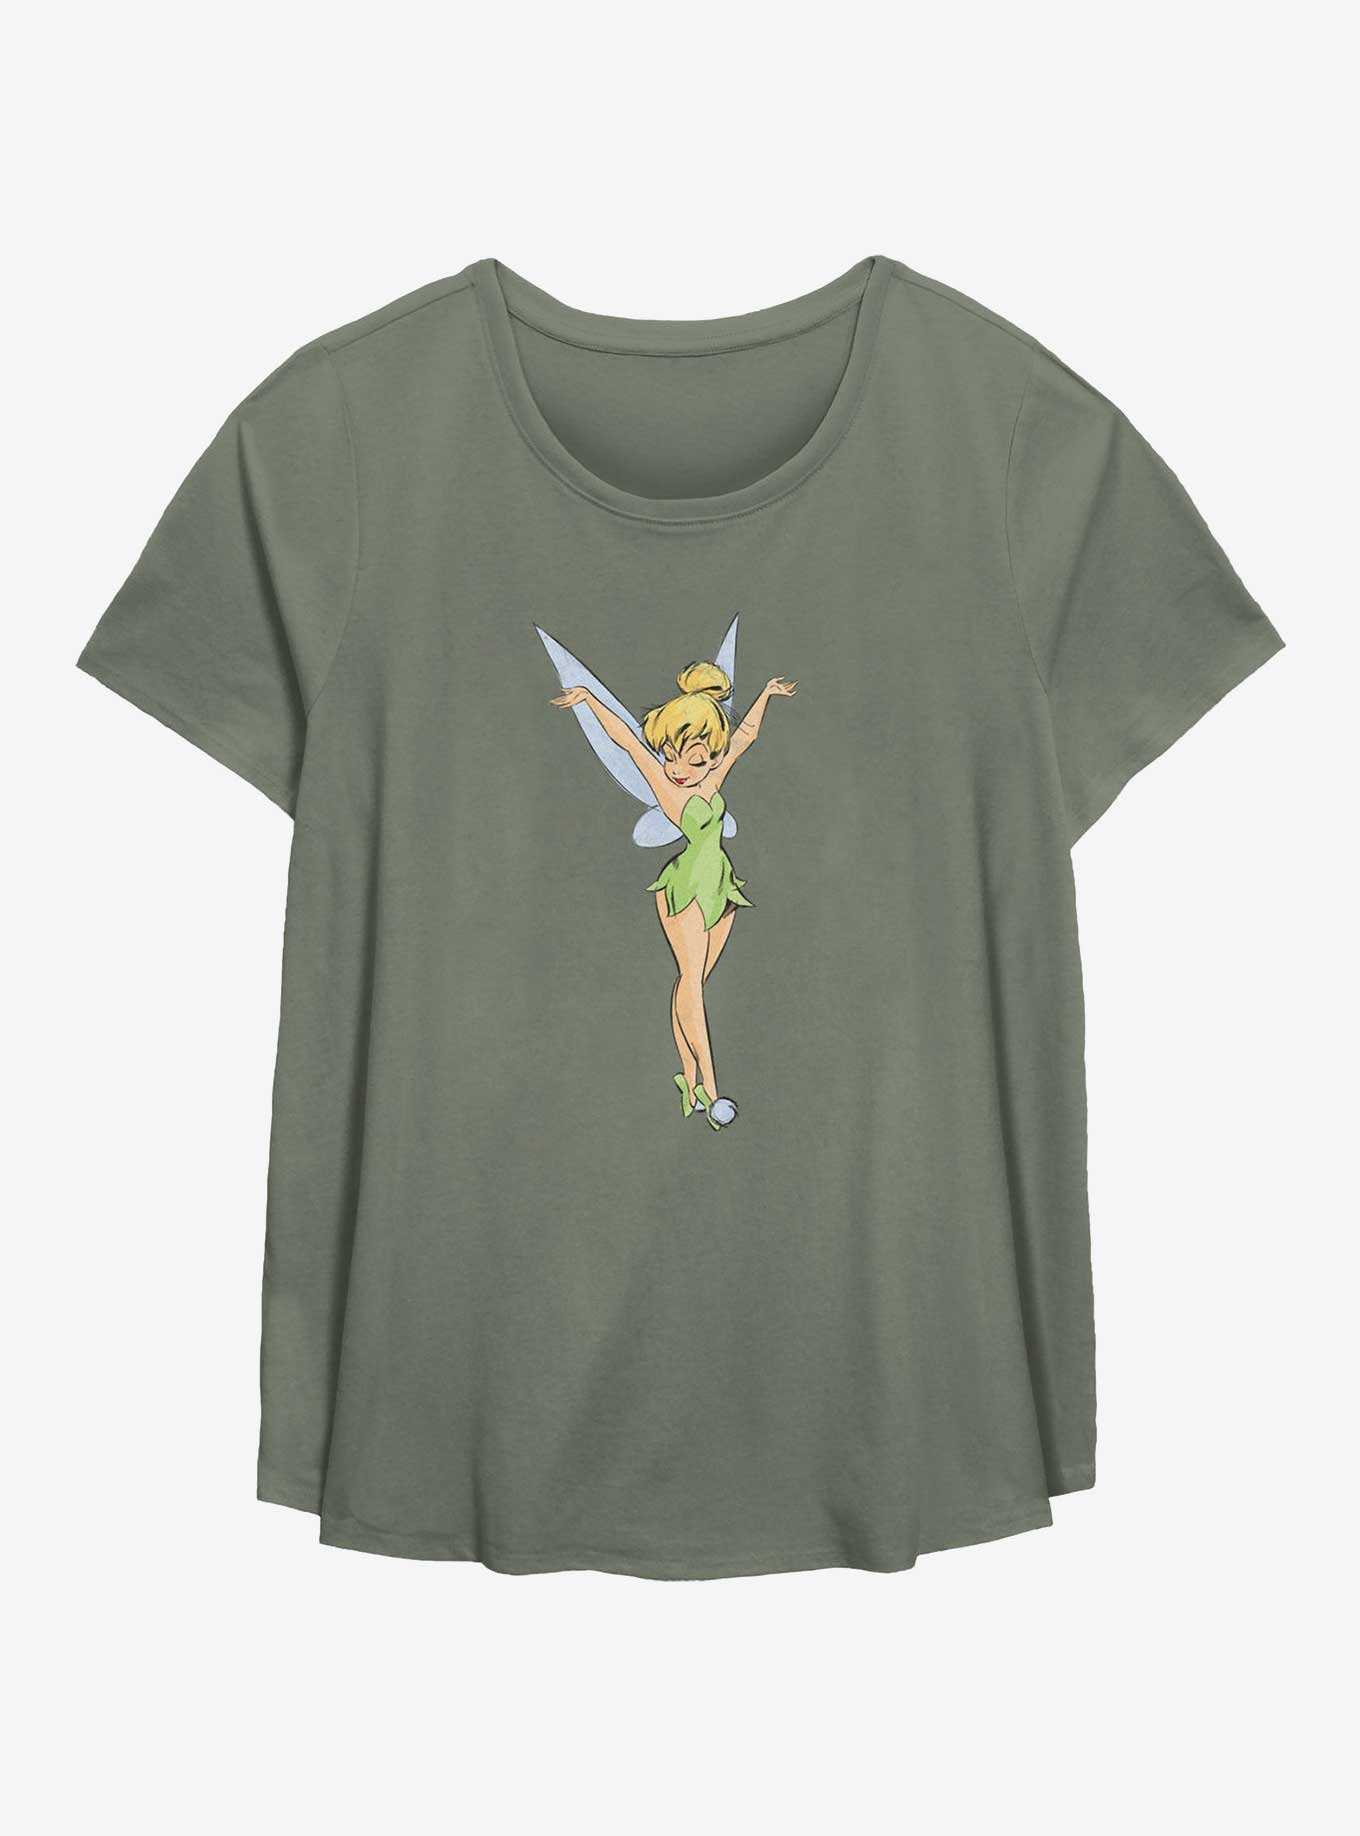 OFFICIAL Peter Pan Merchandise, Shirts & More | Hot Topic